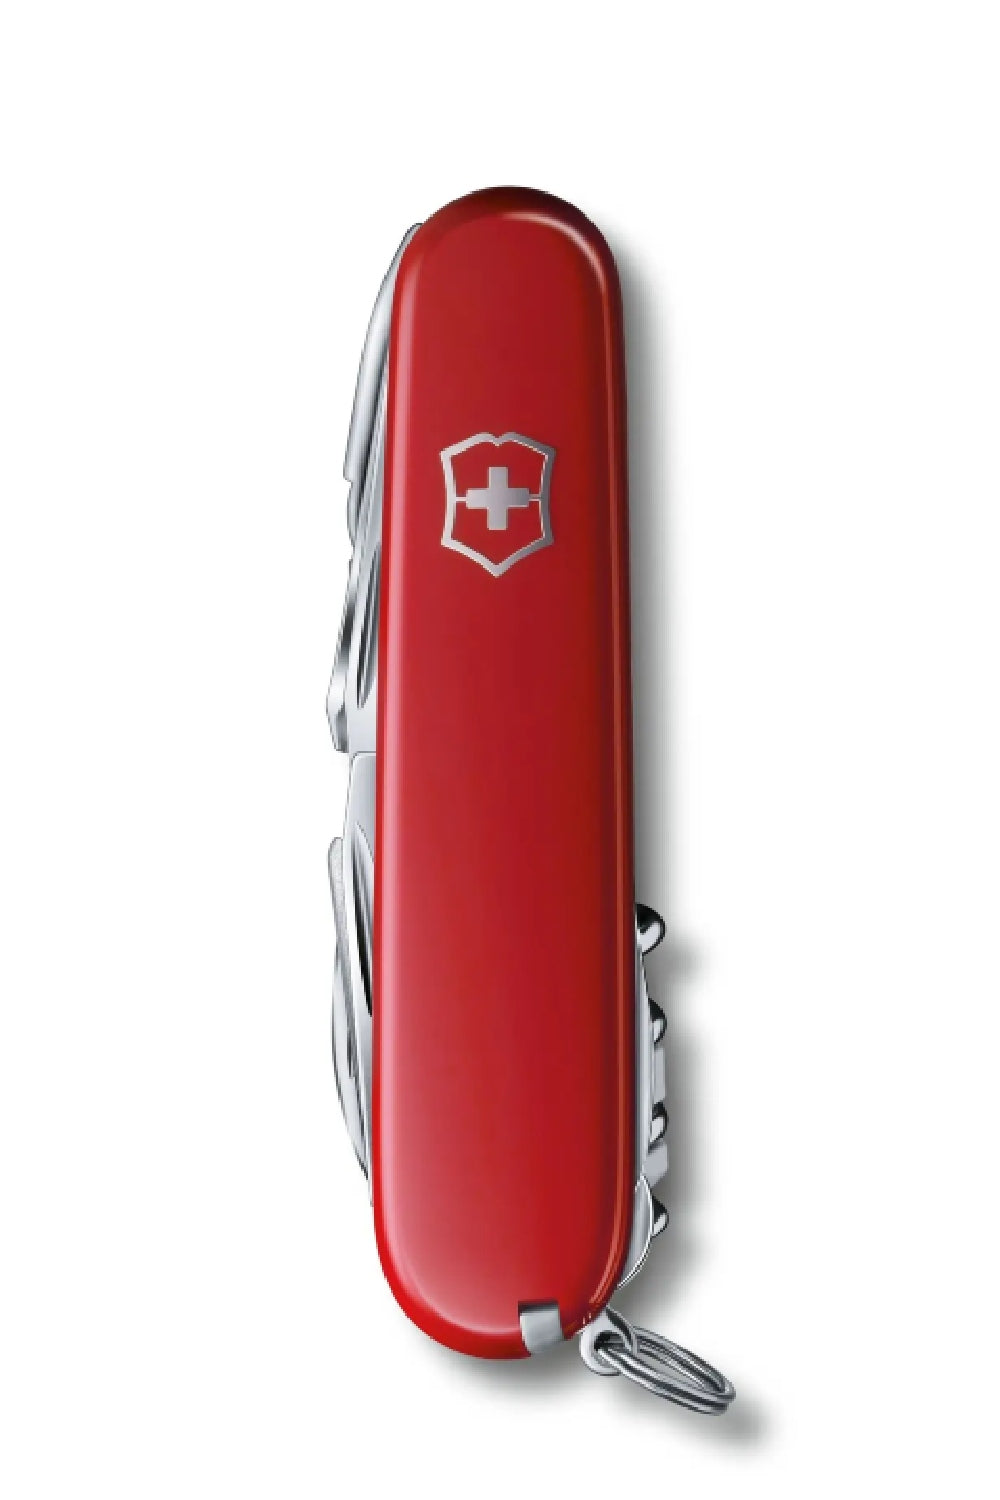 Victorinox Swiss Champ Swiss Army Medium Pocket Knife with 33 Functions in Red